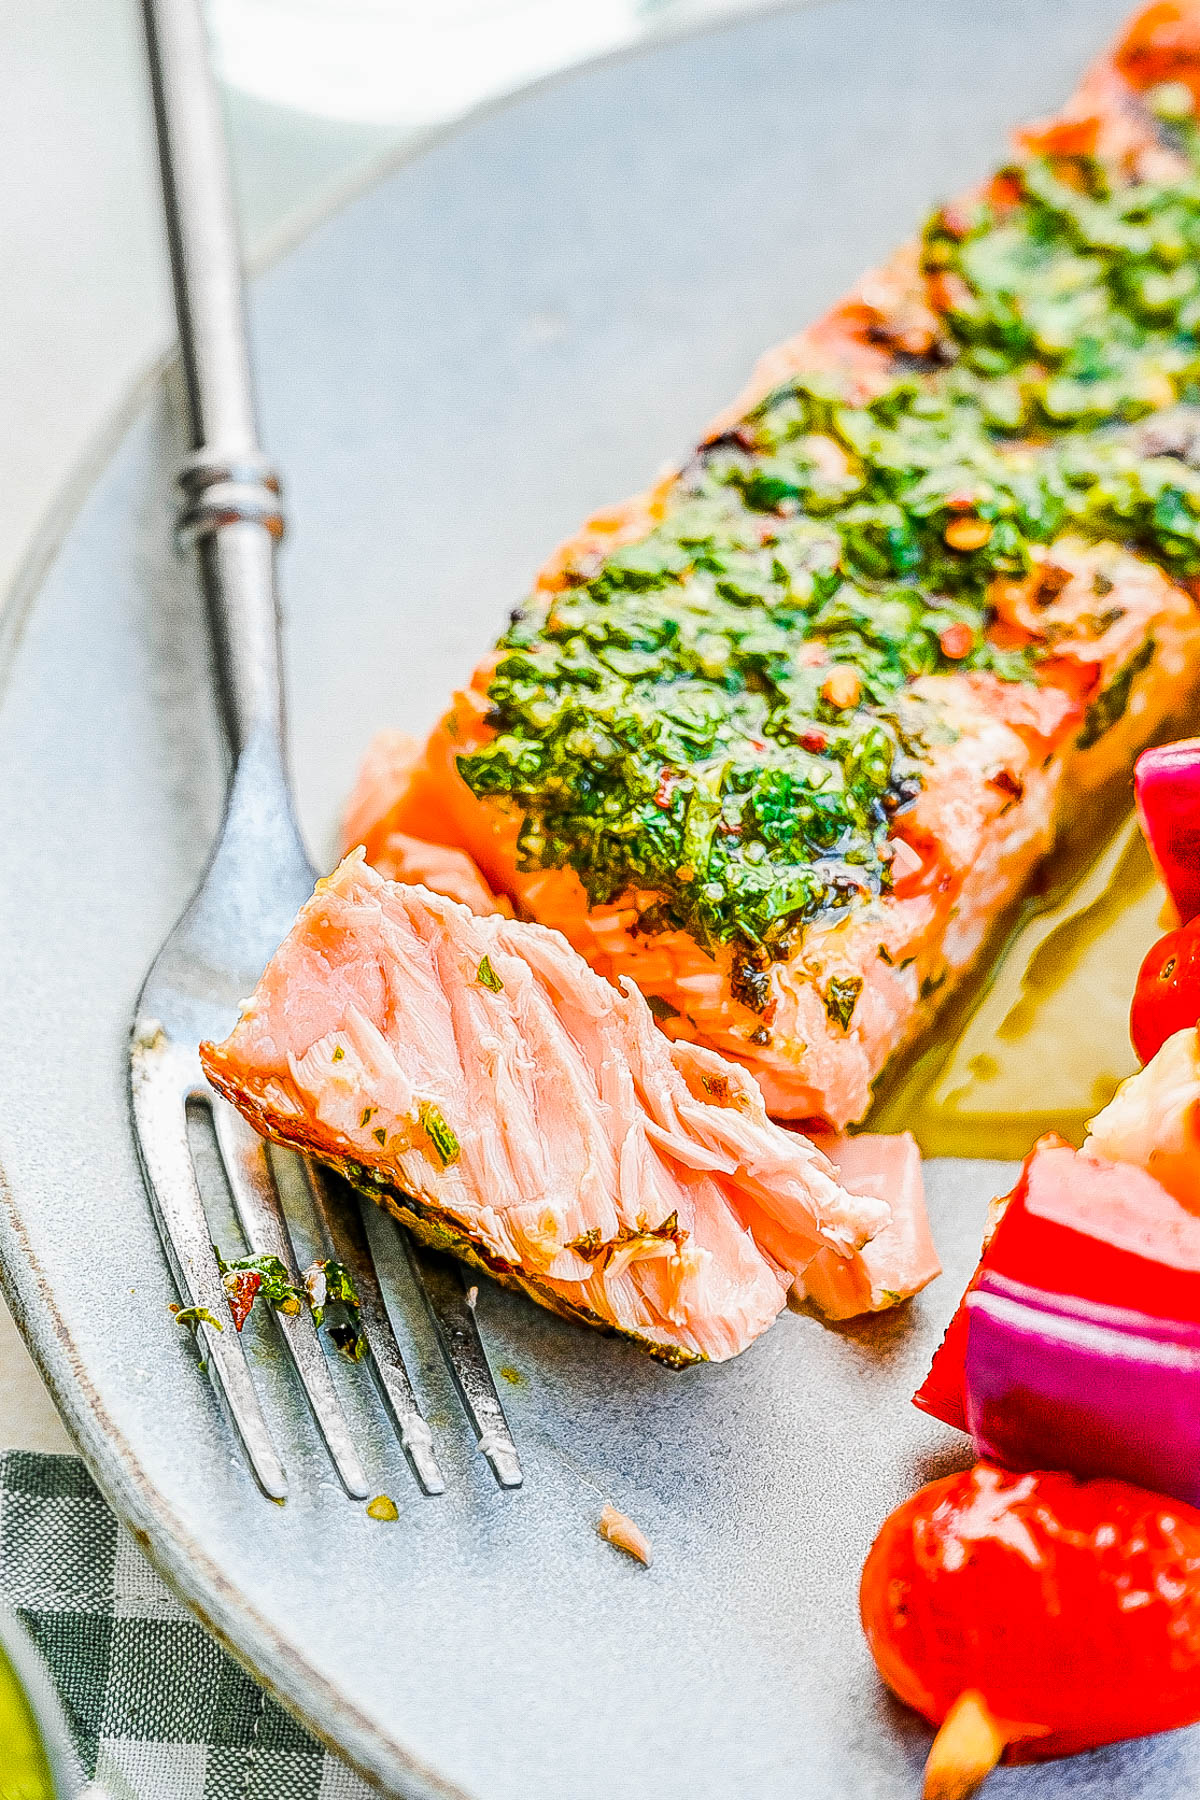 Grilled Chimichurri Salmon — Salmon filets are grilled until flaky and tender, then topped with a tangy herbed chimichurri sauce! This is a FAST and EASY grilled salmon recipe that’s ready in 20 minutes. Perfect for meal prep or whenever you’re craving a fresher and lighter summer meal that's exploding with FLAVOR!